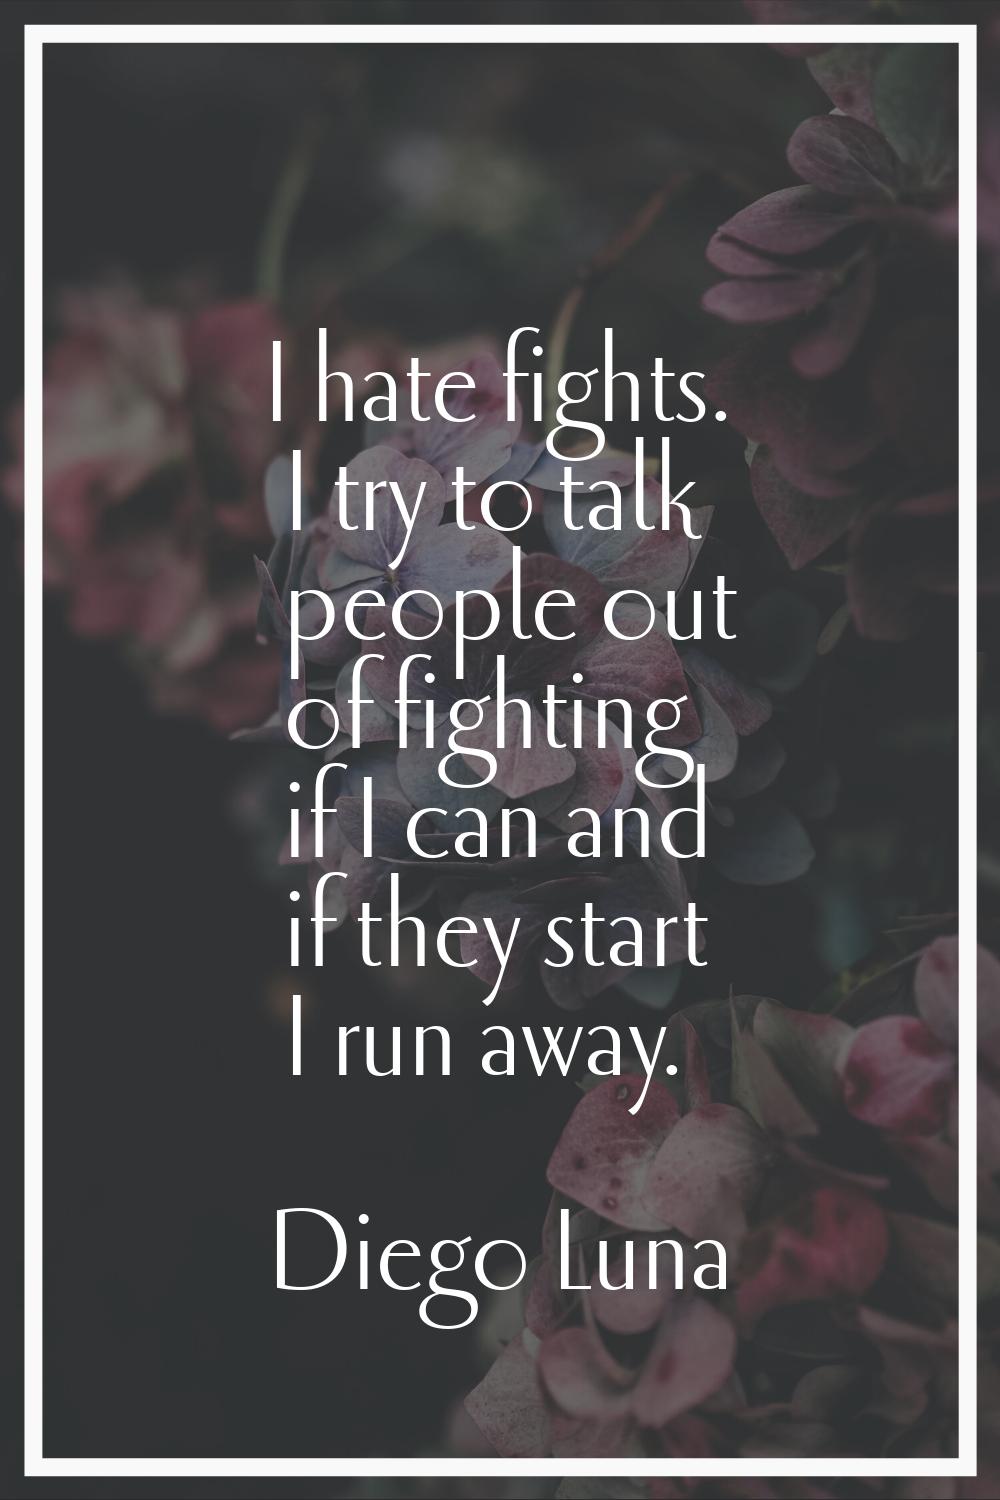 I hate fights. I try to talk people out of fighting if I can and if they start I run away.